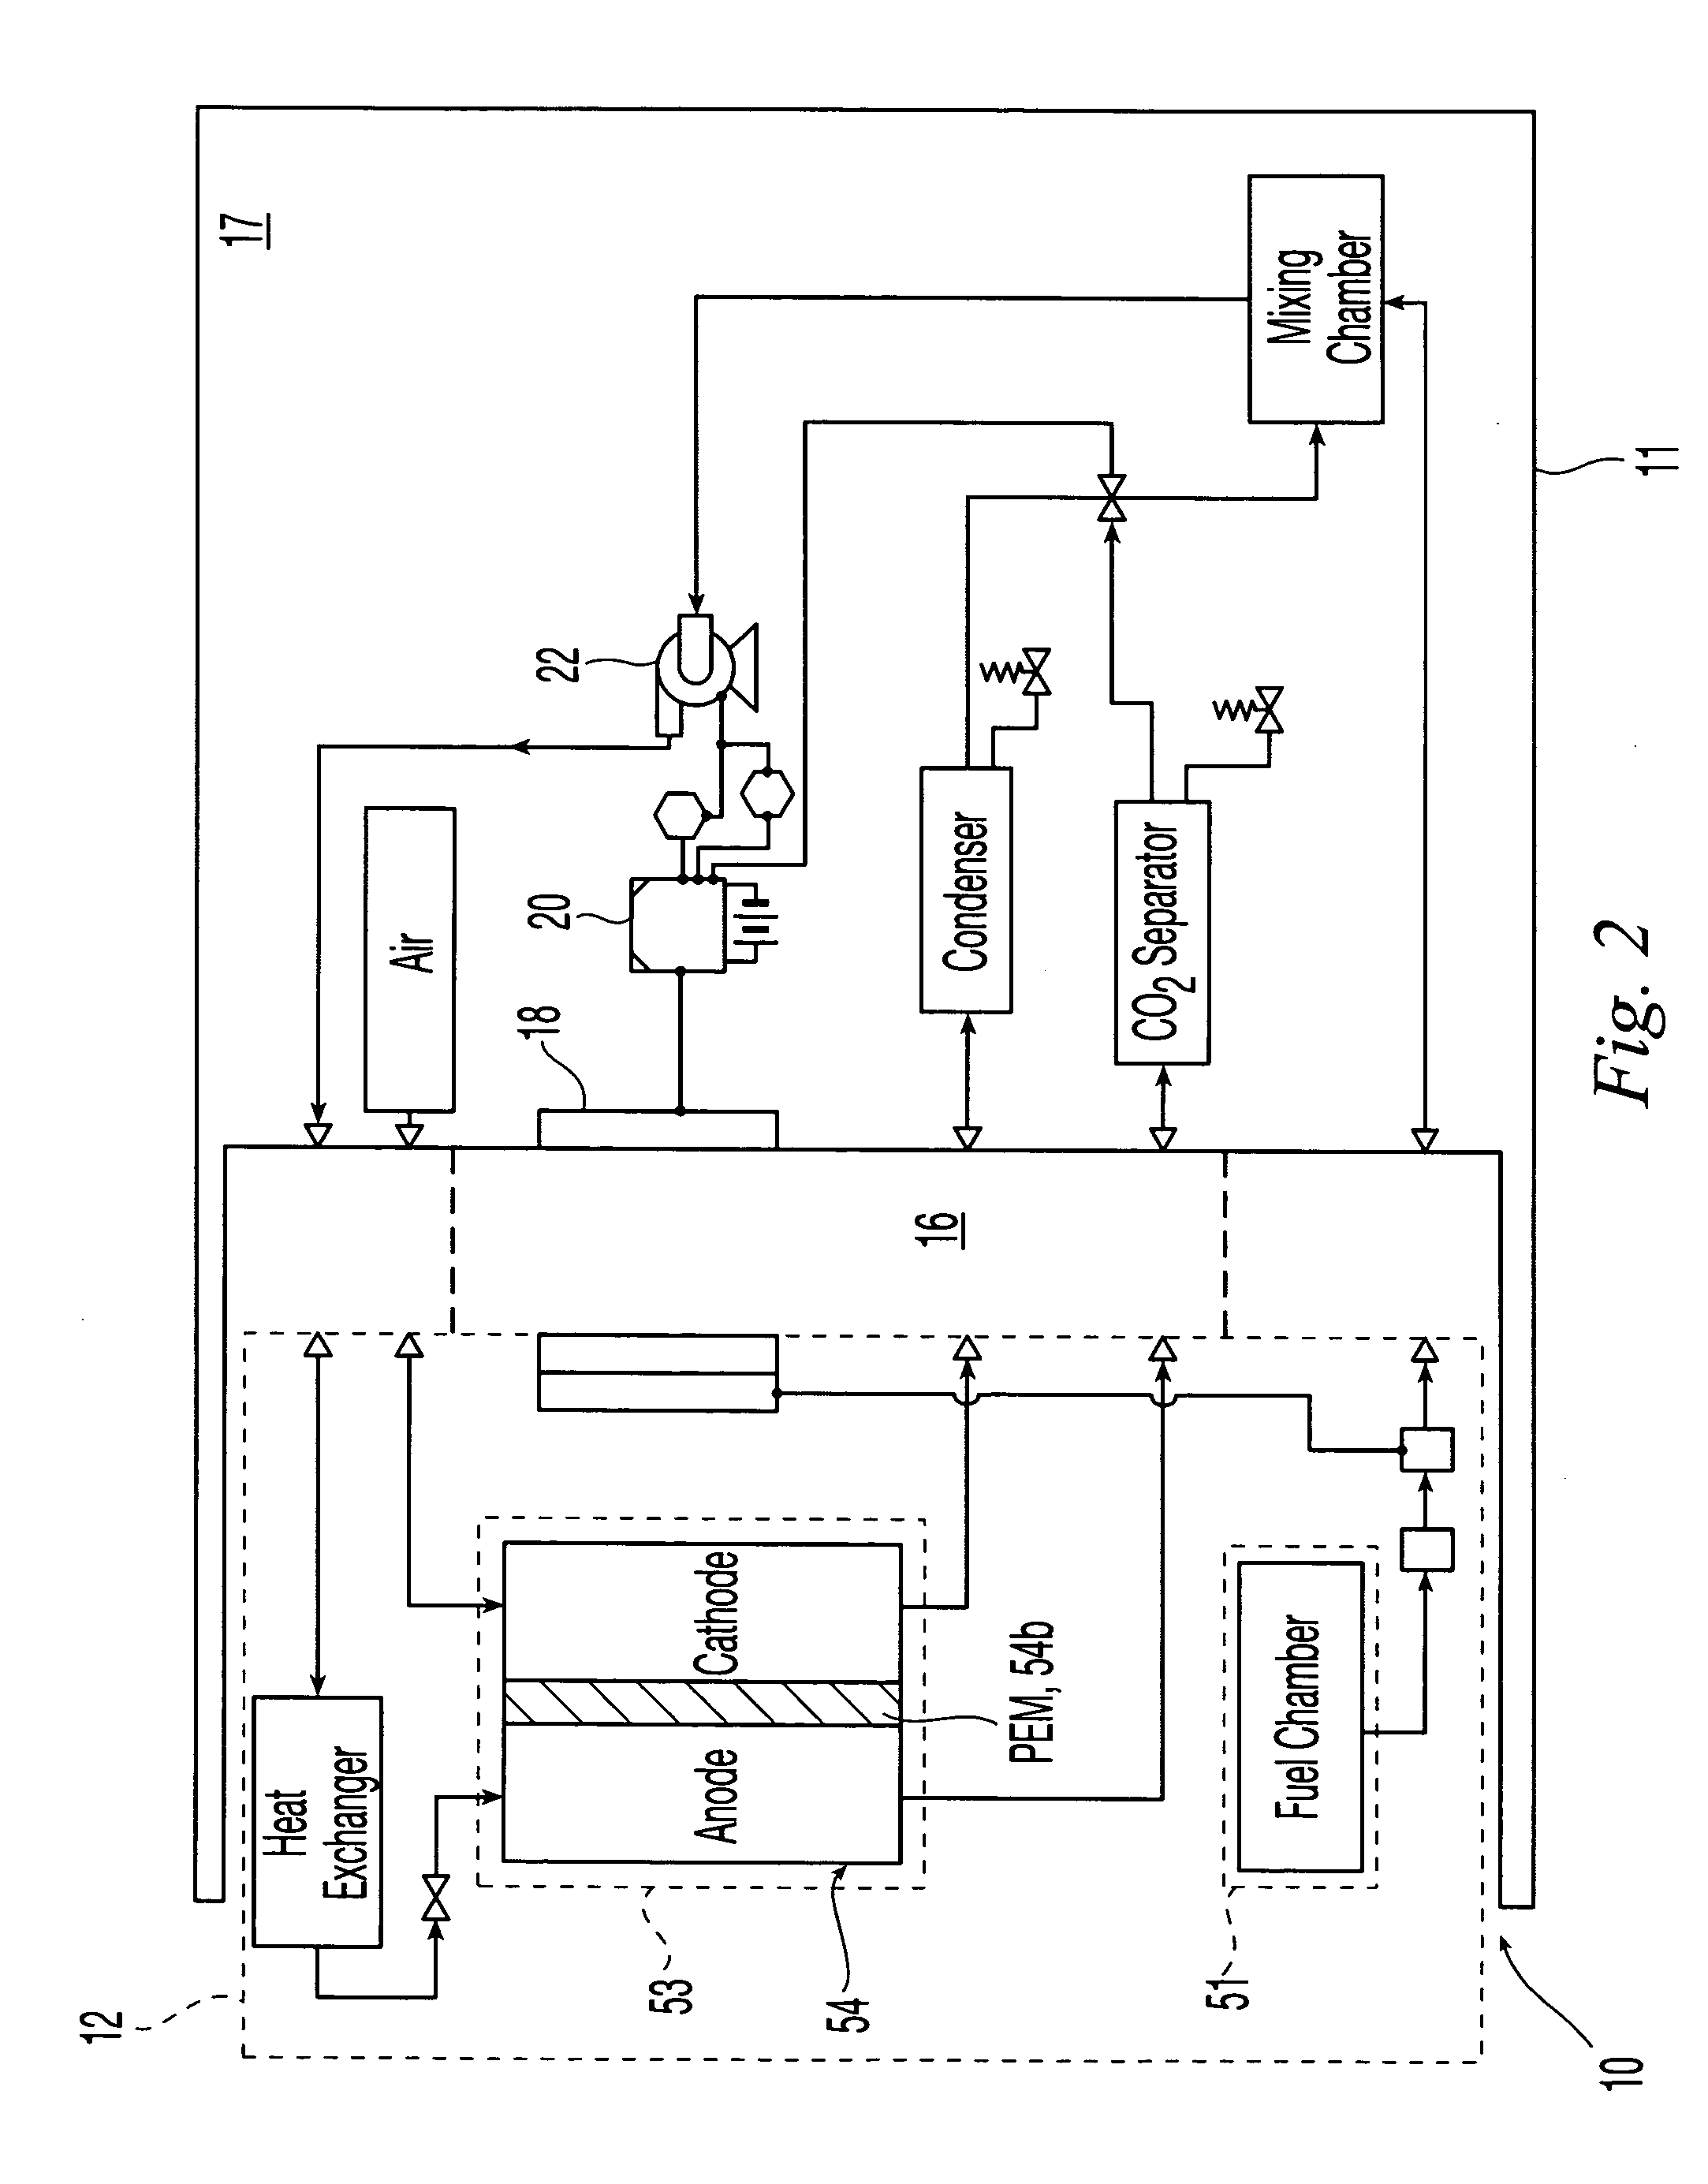 Cartridge with fuel supply and membrane electrode assembly stack